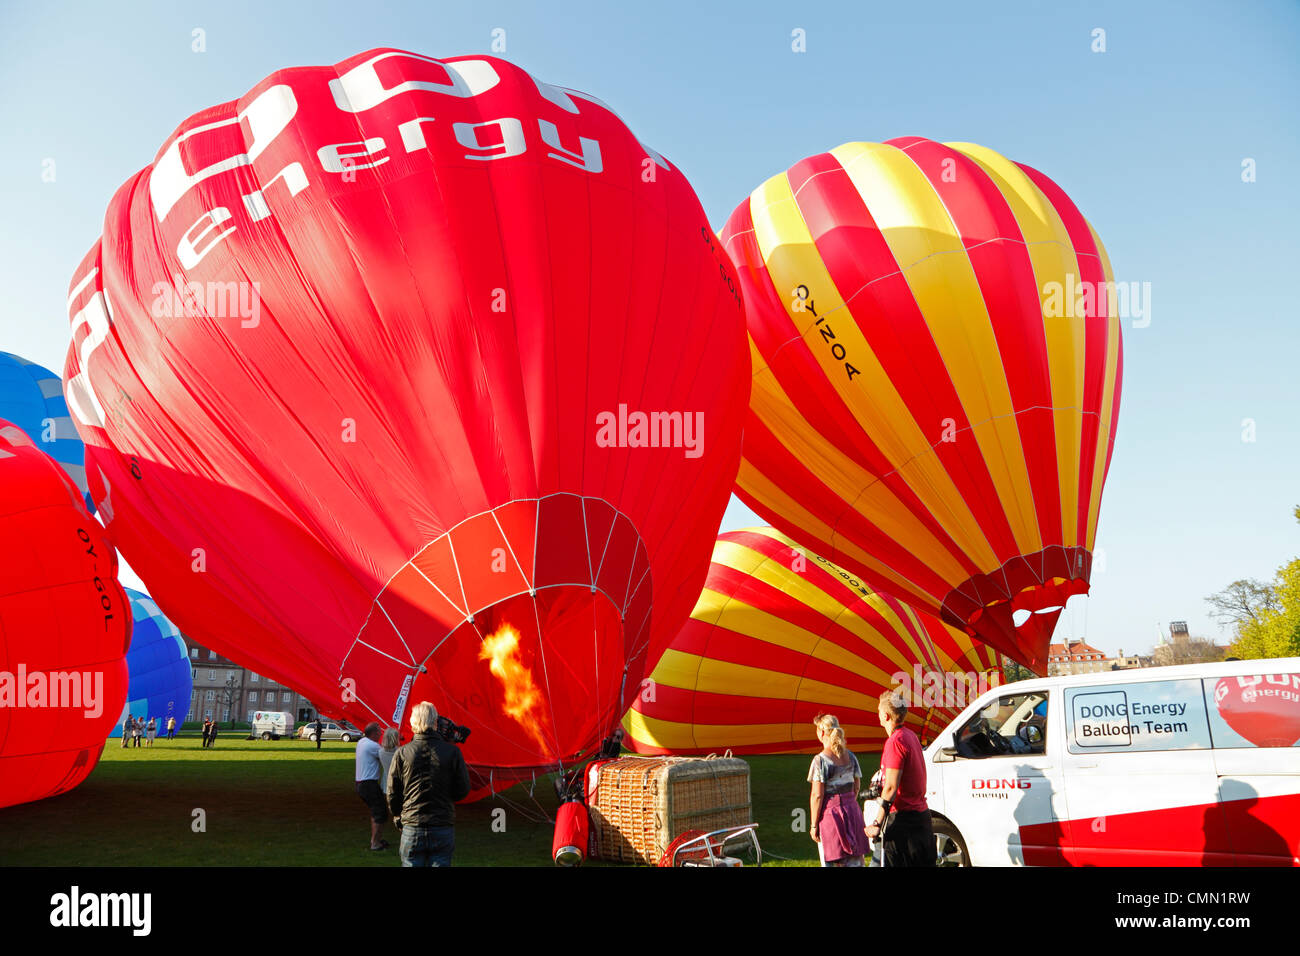 The Dong Energy Balloon Team at a commemorative ascension on 200th anniversary of first Danish balloon voyage. Rosenborg Palace Stock Photo